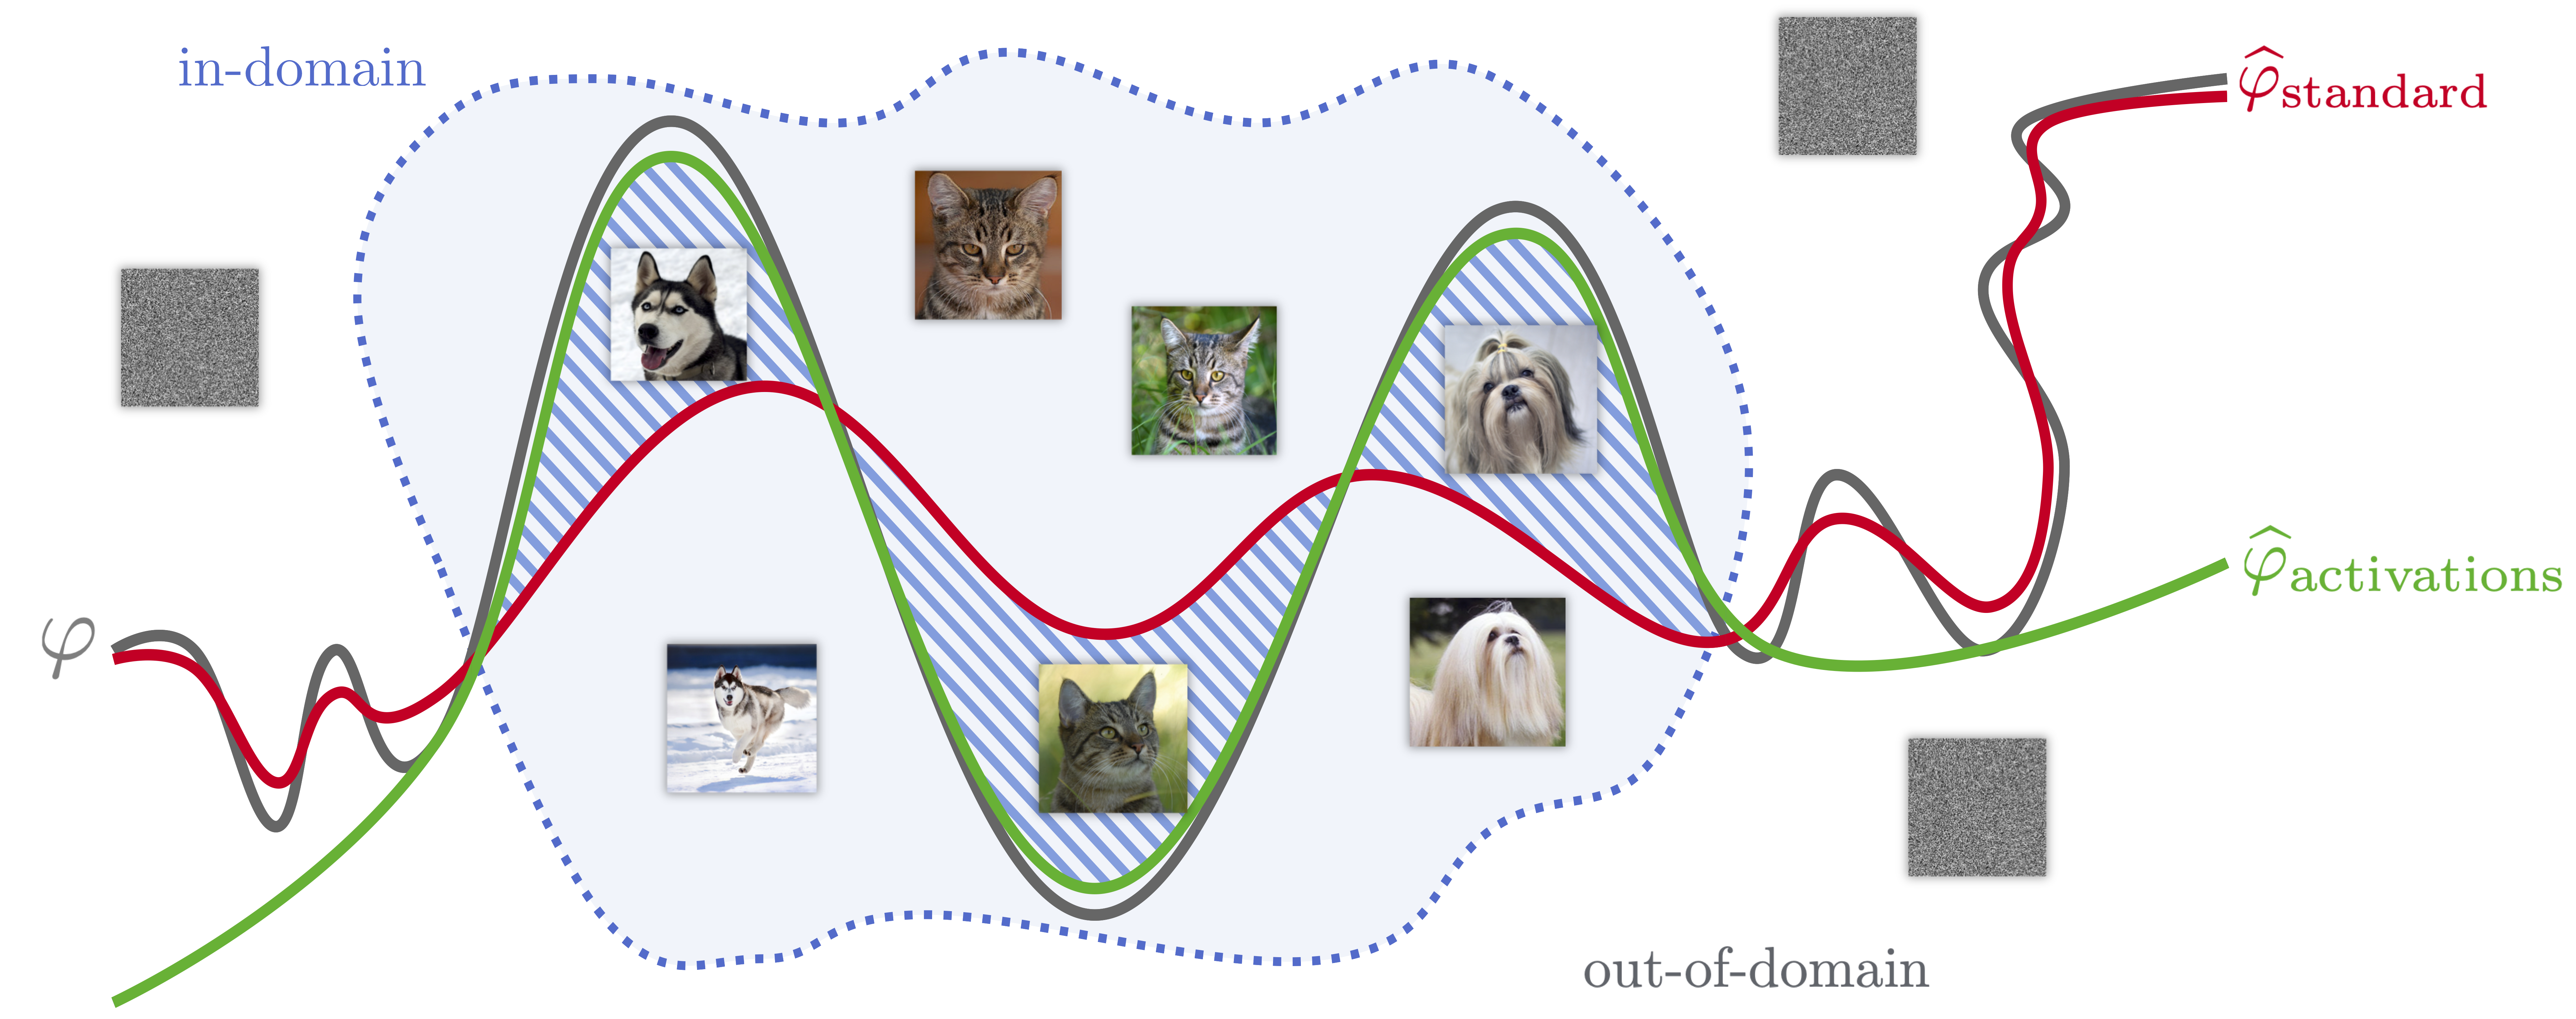 Illustration of our method. We approximate a binary classifier $\varphi$ that labels images $x$ as dogs or cats by quantizing its weights.
    \textbf{Standard method}: quantizing $\varphi$ with the standard objective function \eqref{eq:pq_obj} leads to a classifier $\widehat \varphi_{\text{bad}}$ that tries to approximate $\varphi$ over the entire input space and thus performs badly for in-domains inputs.
    \textbf{Our method}: quantizing $\varphi$ with our objective function \eqref{eq:ours_obj} leads to a classifier  $\widehat \varphi_{\text{good}}$ that performs well for in-domain inputs.
    \benjamin{Maybe move the $\widehat \varphi_{\text{bad}}$ and $\widehat \varphi_{\text{good}}$ labels from the top left corner into the image close to the respective lines. Then the $\phi(x)$ can come down a little.